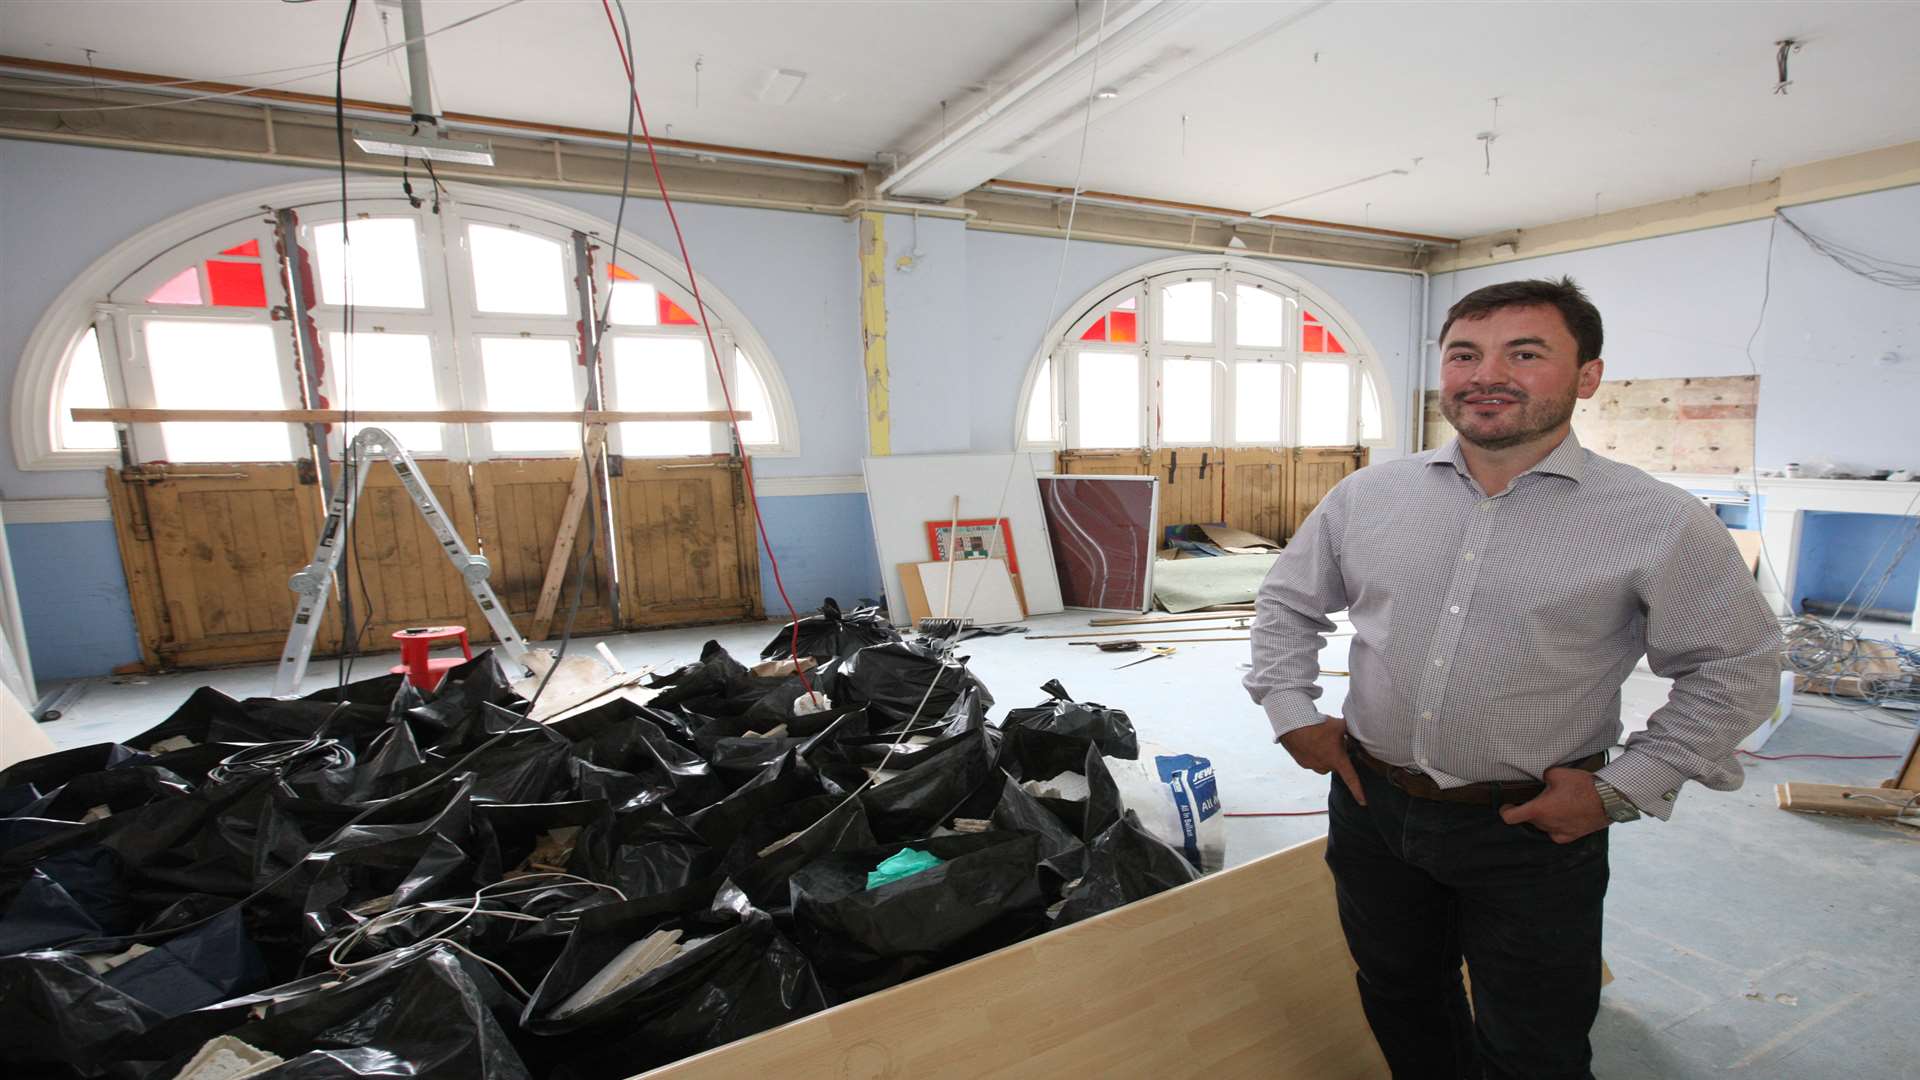 The building is currently disused, Richard Collins wants to bring pop up shops and restaurants to the site